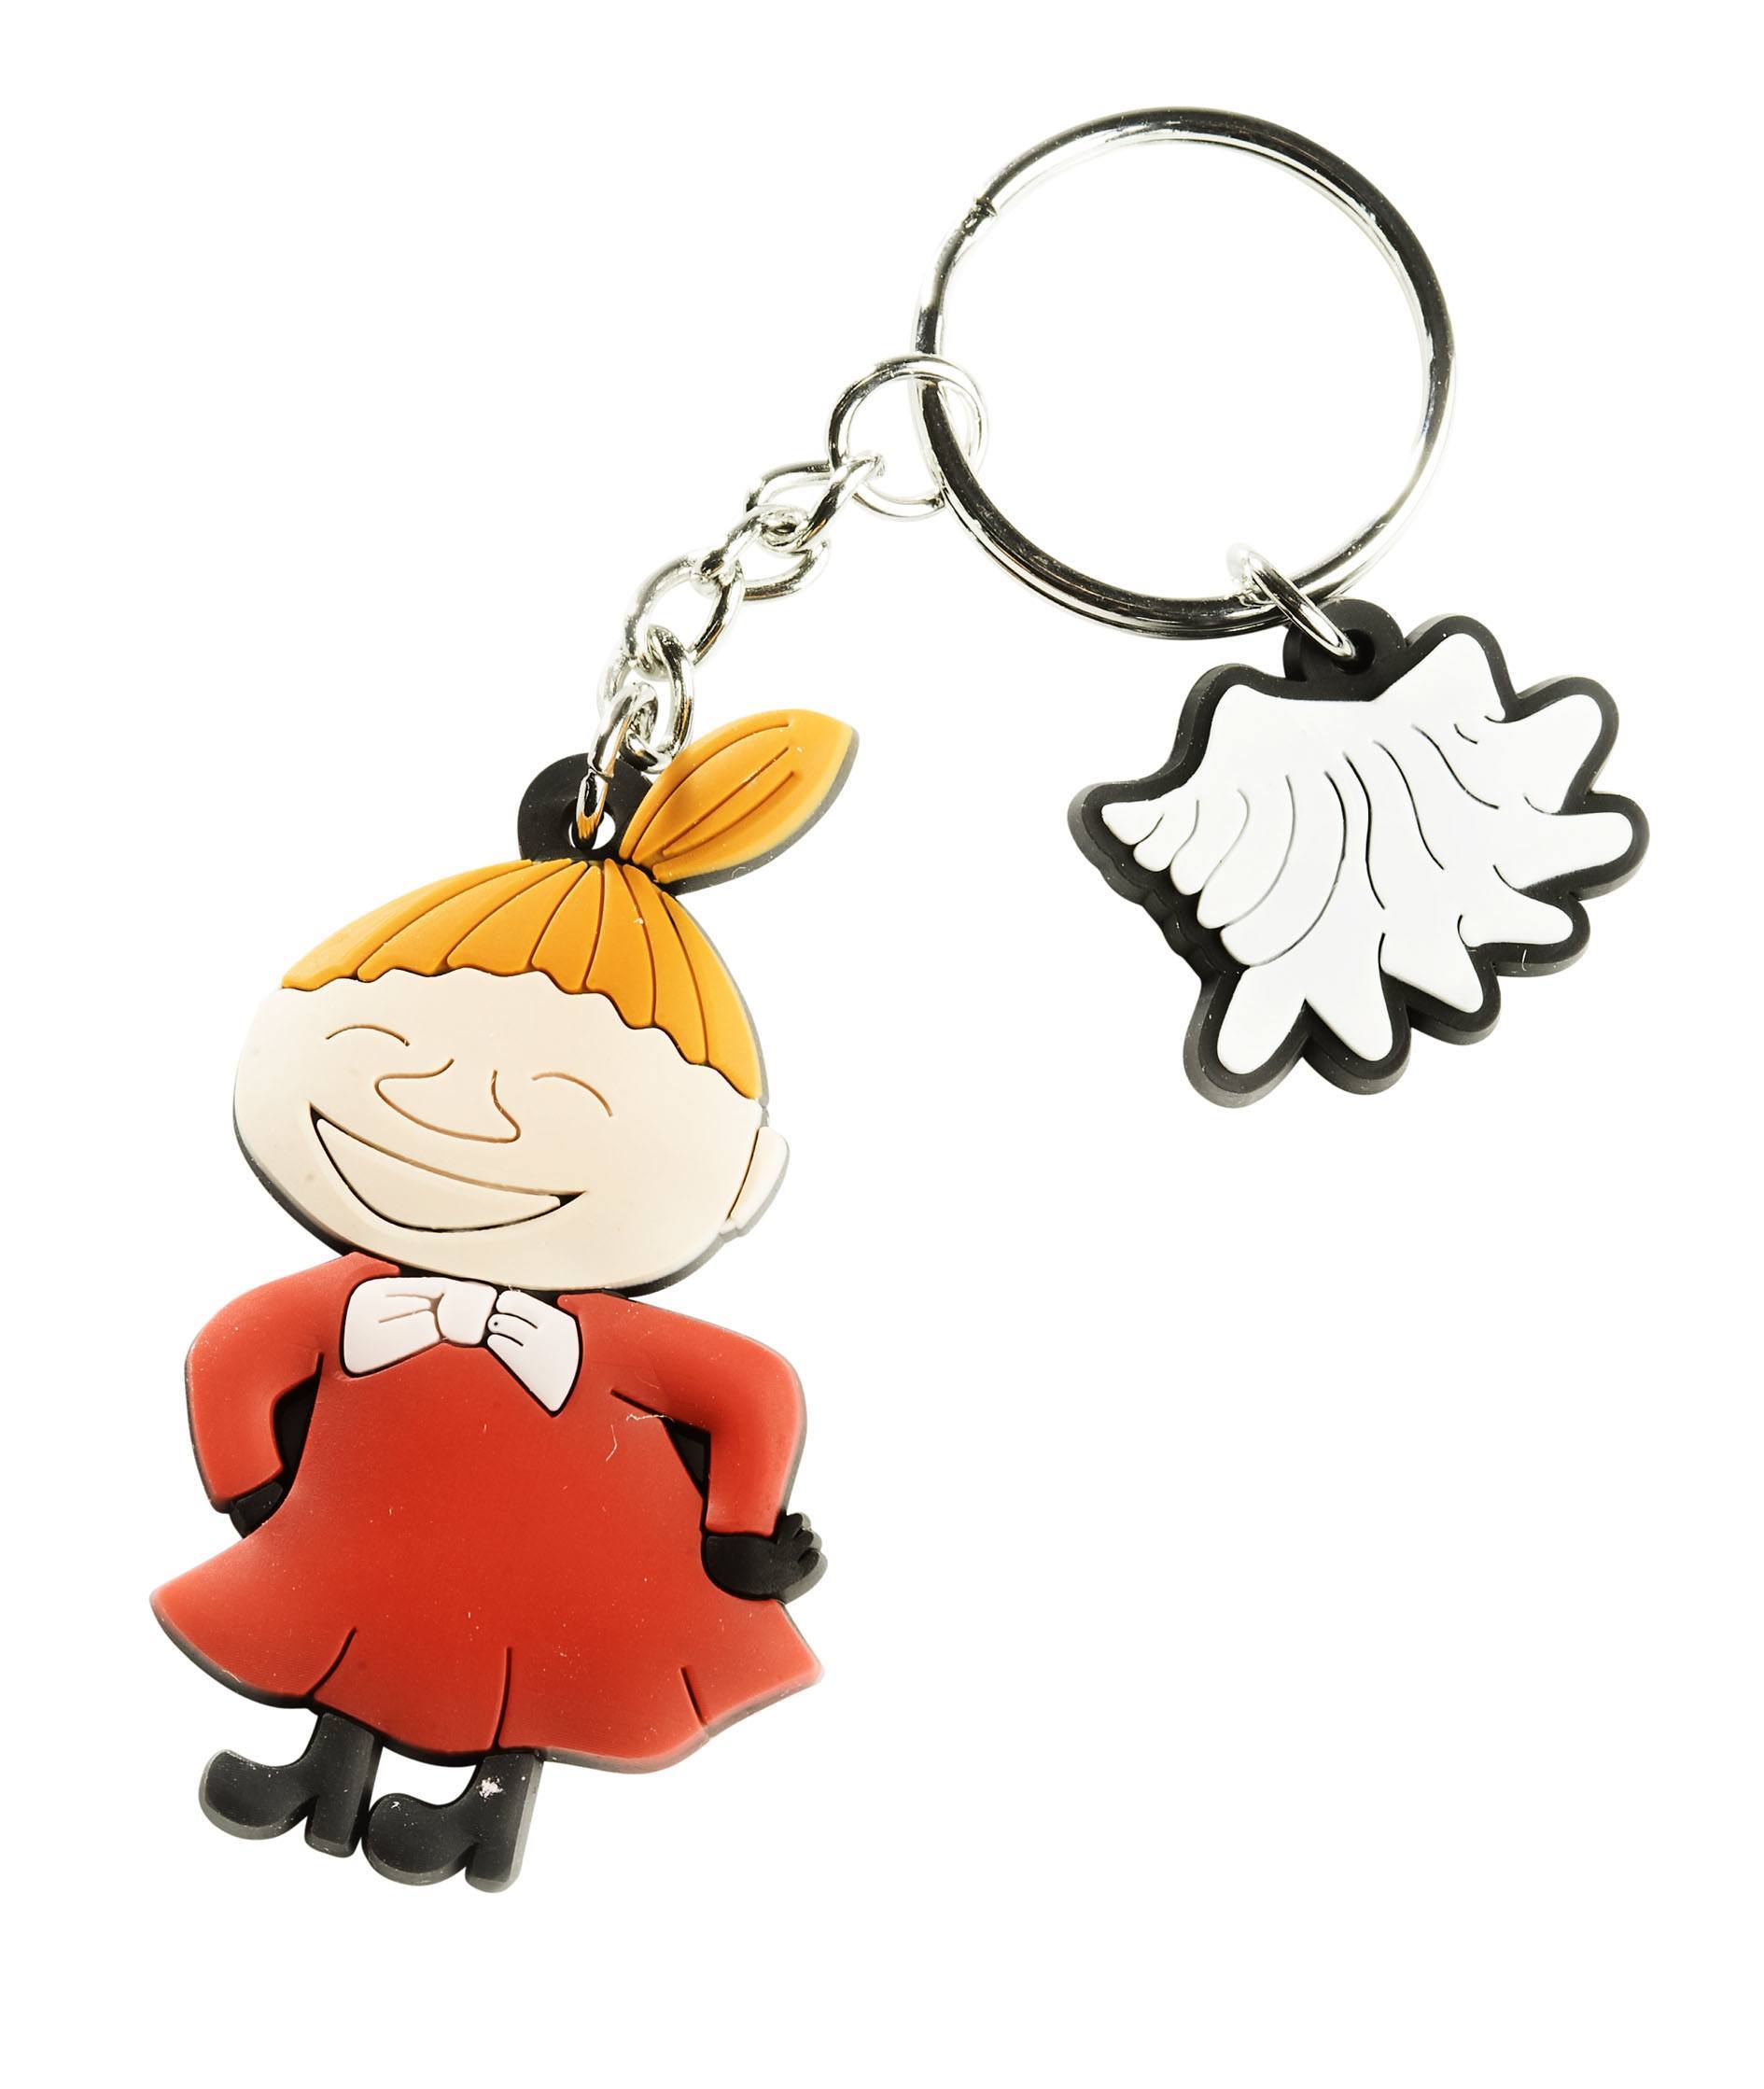 CAILAP KEY RING WITH LITTLE MY